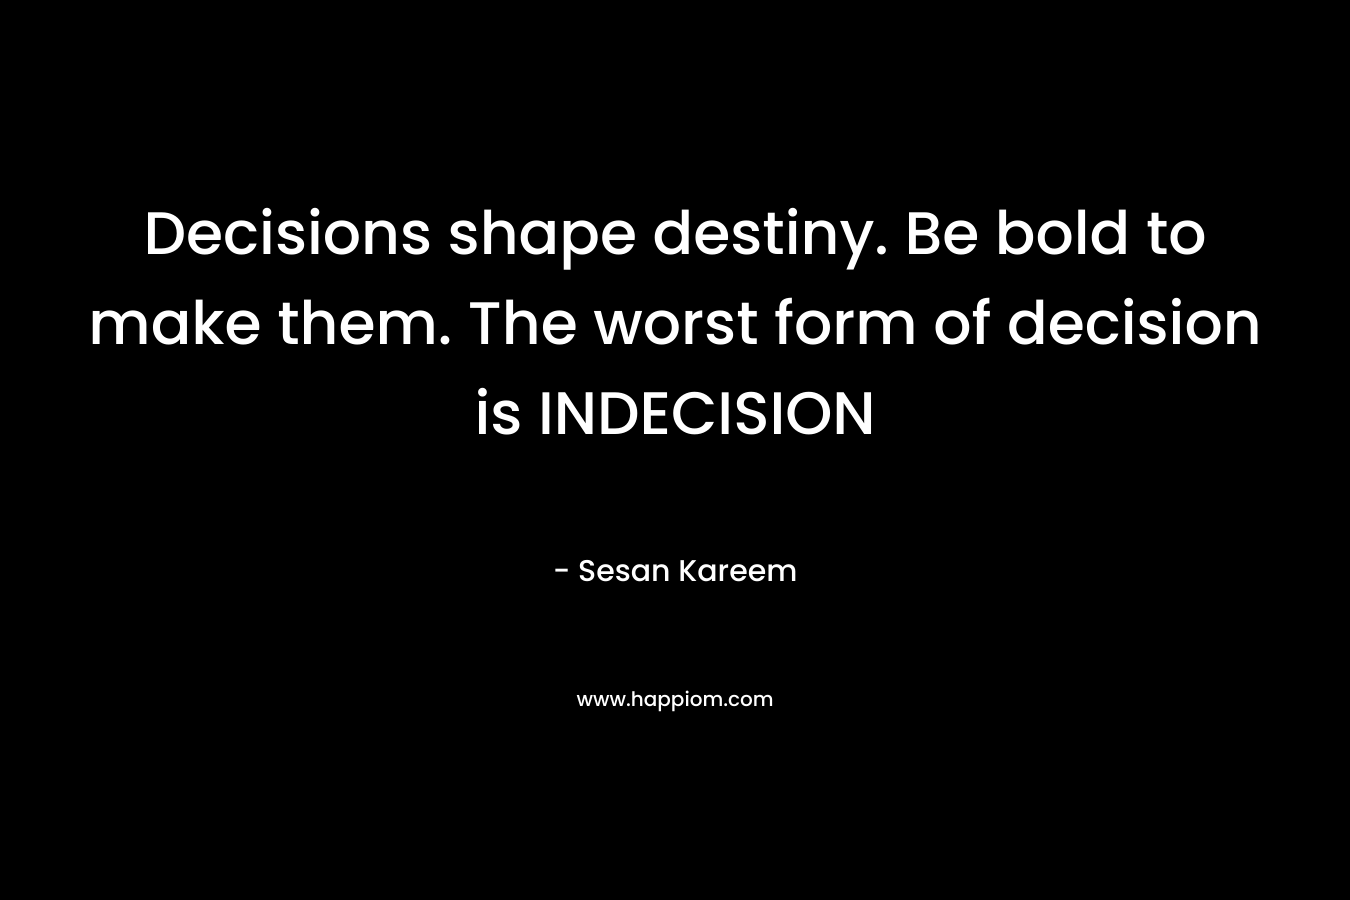 Decisions shape destiny. Be bold to make them. The worst form of decision is INDECISION – Sesan Kareem